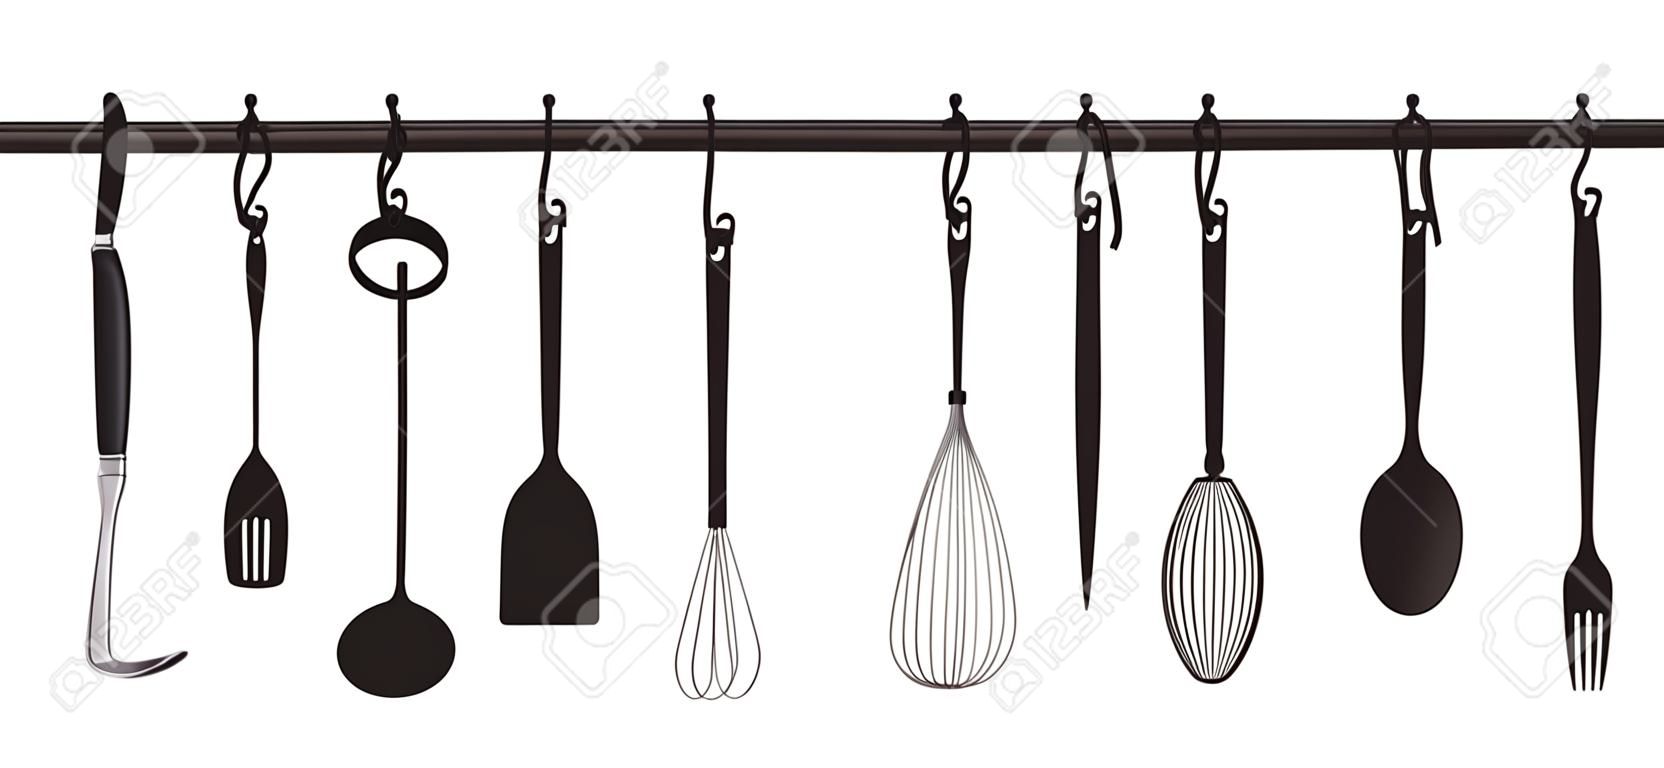 A collection kitchen utensils hanging on the chromed bar. Illustration